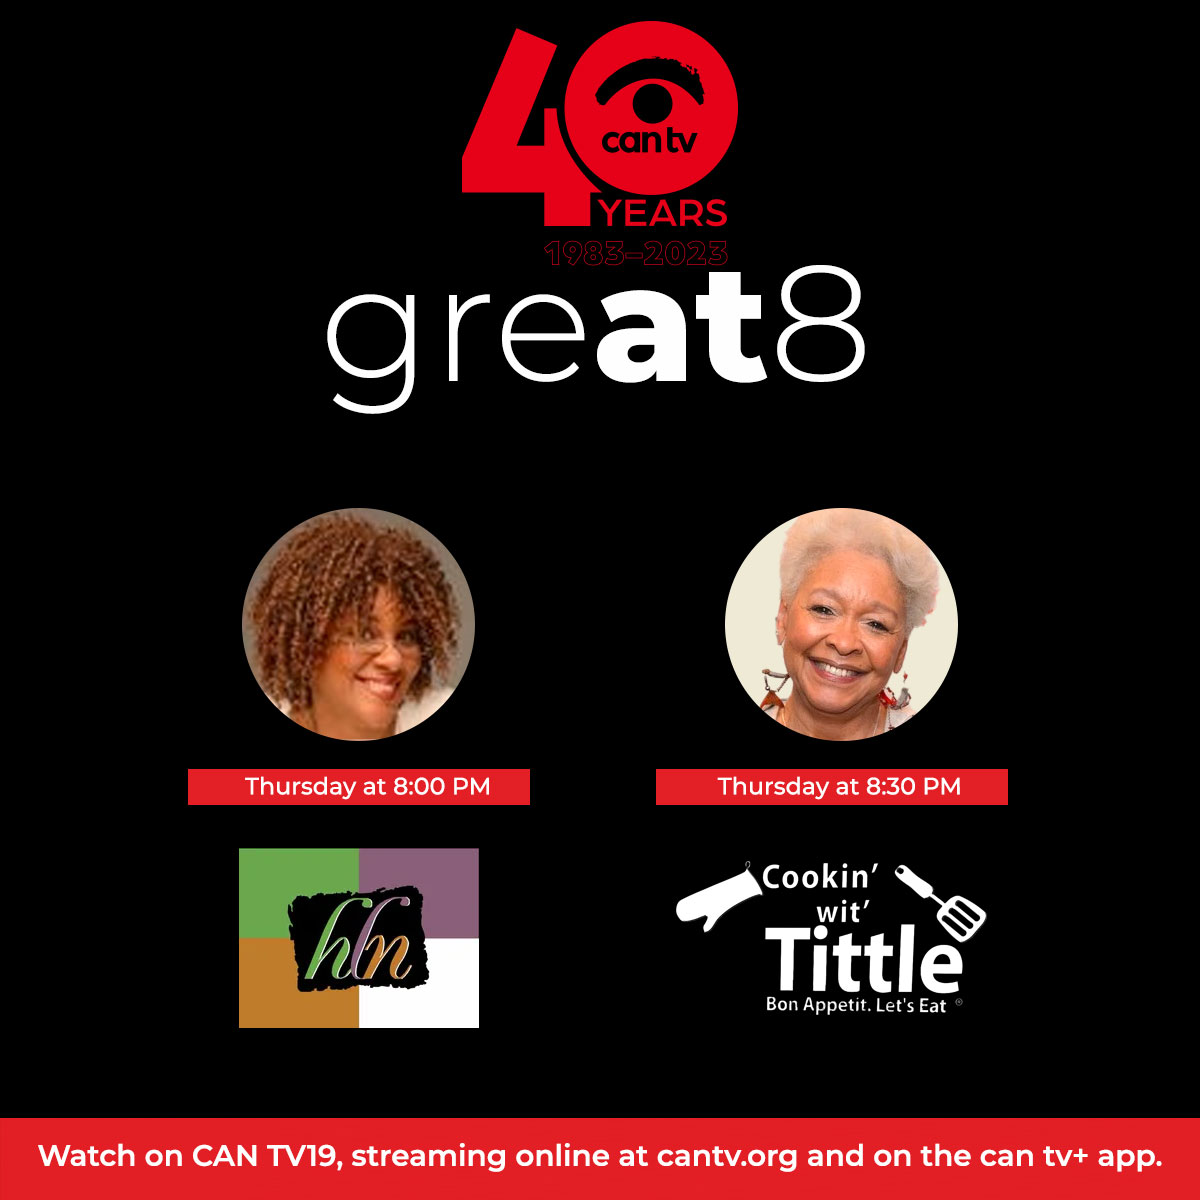 Get ready to join Zelda Robinson for Higher Learning Network and La Donna Tittle for Cookin' Wit' Tittle. Don't miss the chance to expand your knowledge and your recipe box with these amazing shows! Tune in to CAN TV19 at 8 PM, stream online, or watch on the can tv+ app.